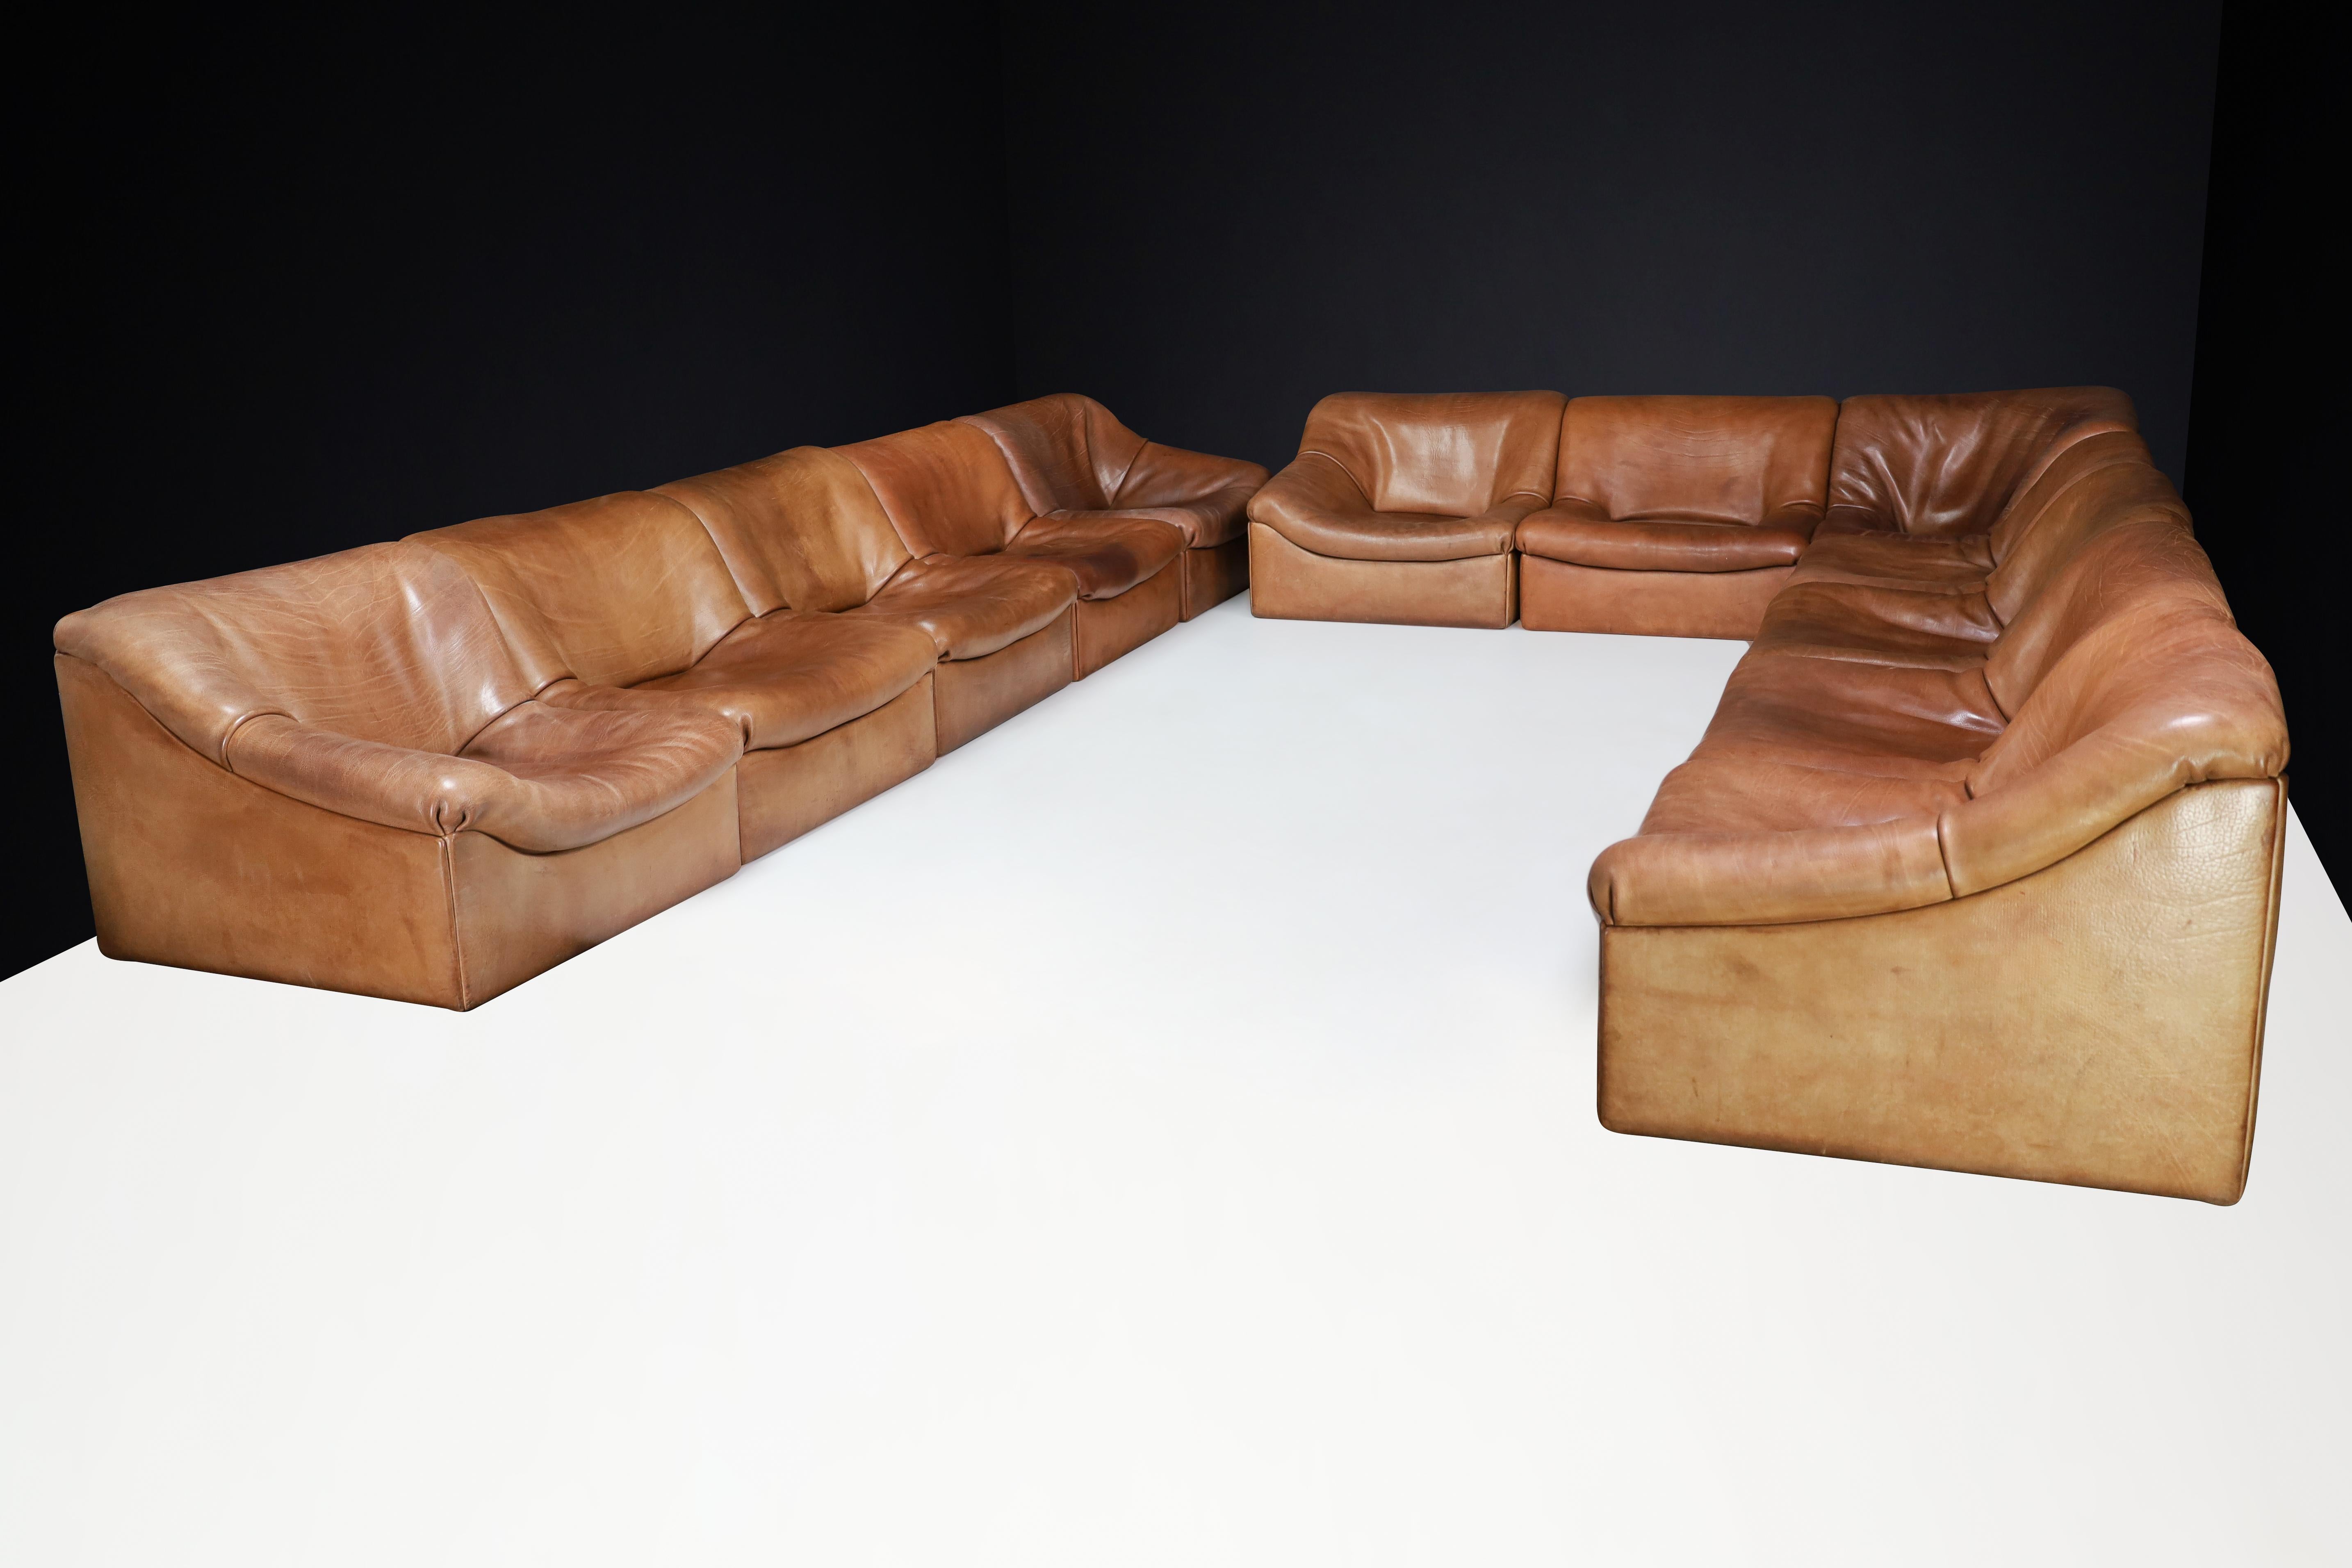 Mid-Century Modern De Sede Ds46 Sectional Sofa-Livingroomset in Buffalo Leather, Switzerland 1970s For Sale